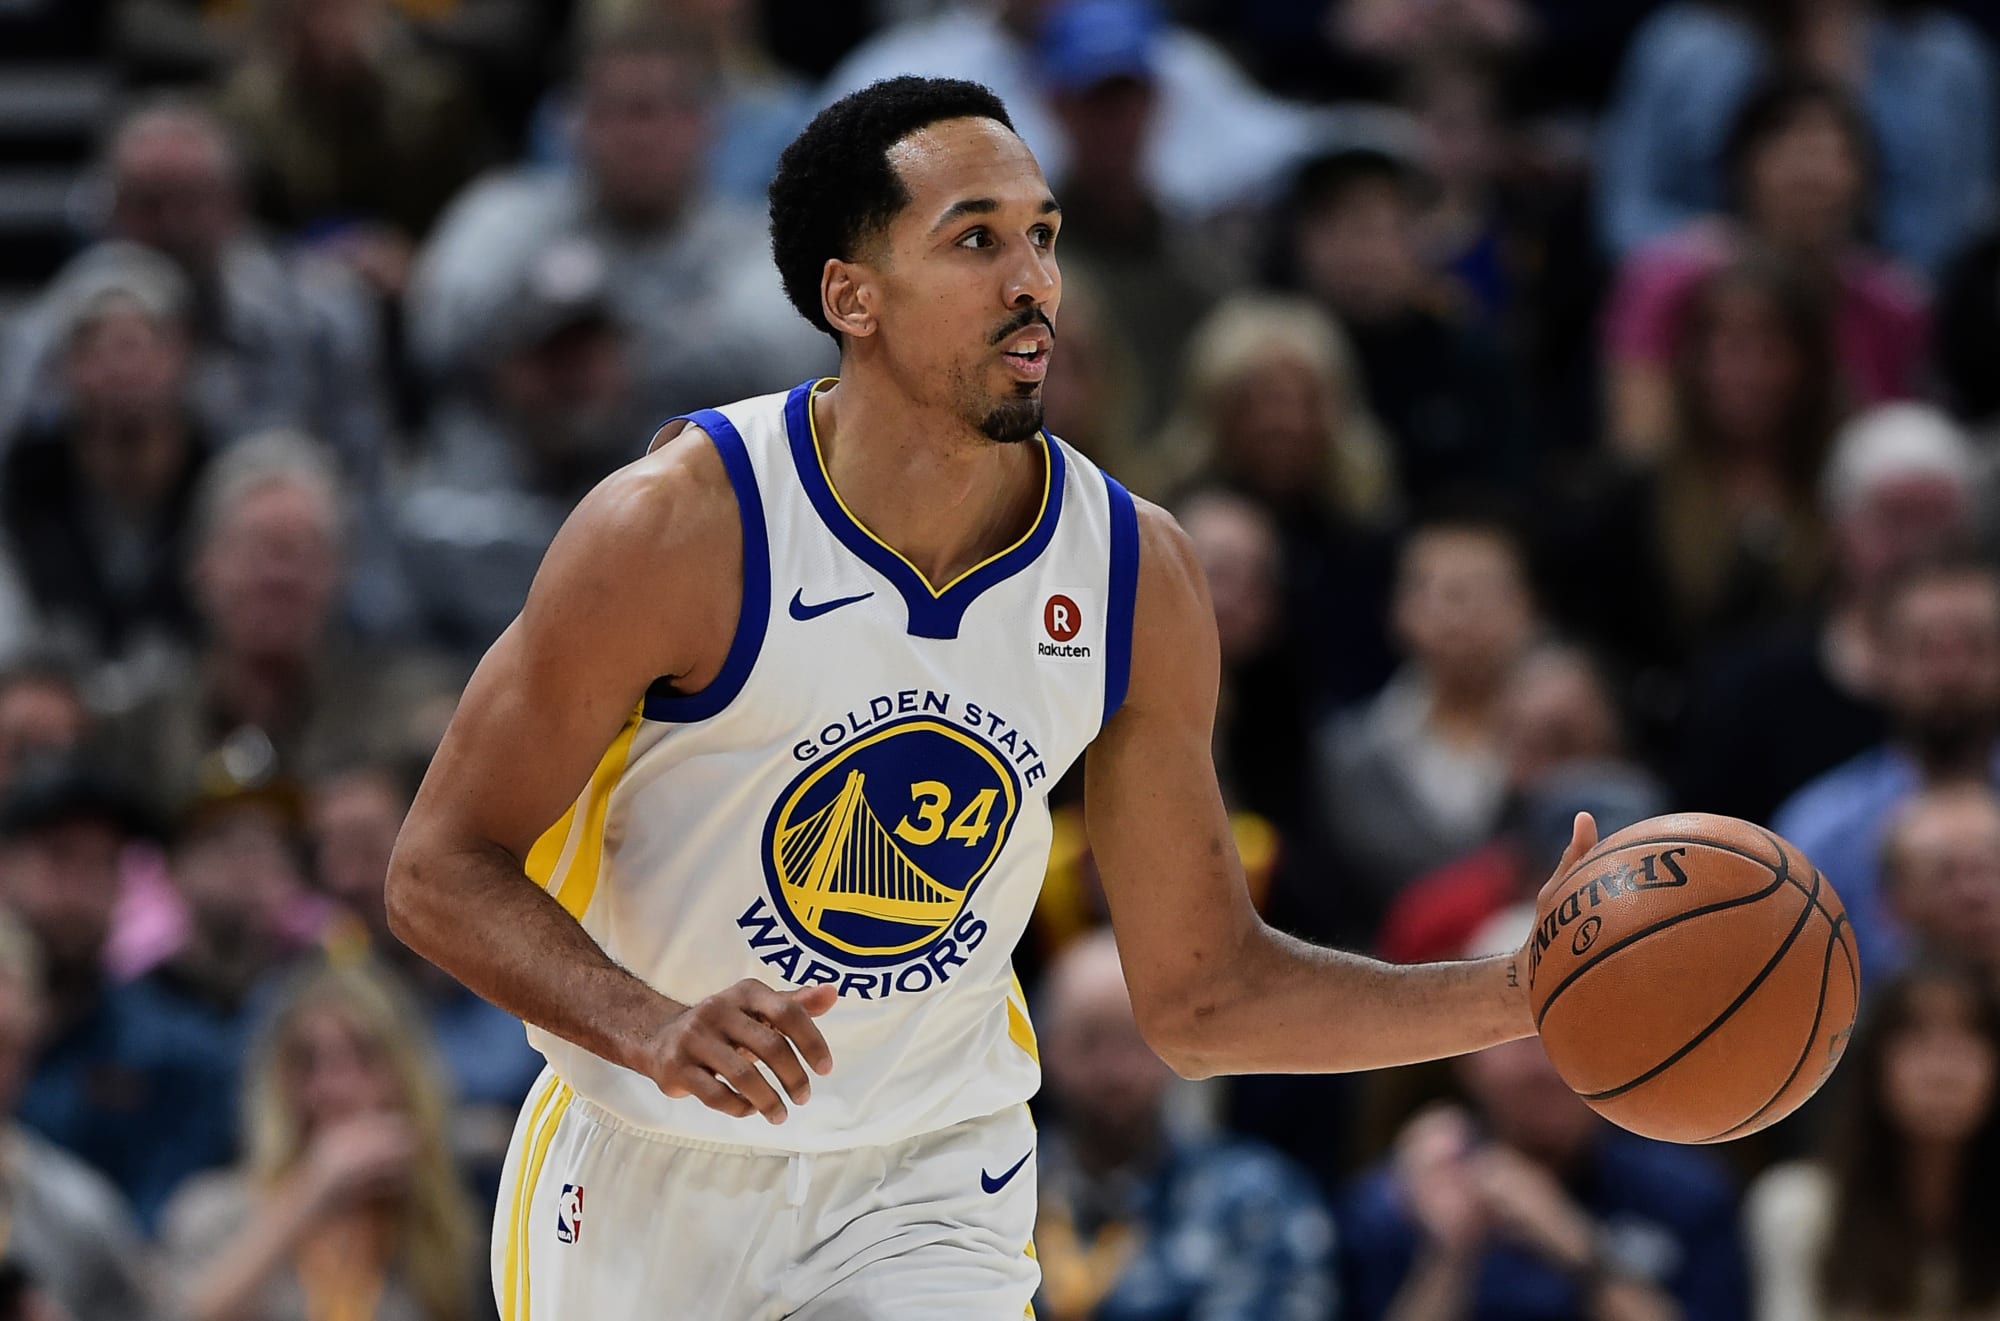 The Golden State Warriors should hire Shaun Livingston as a consultant